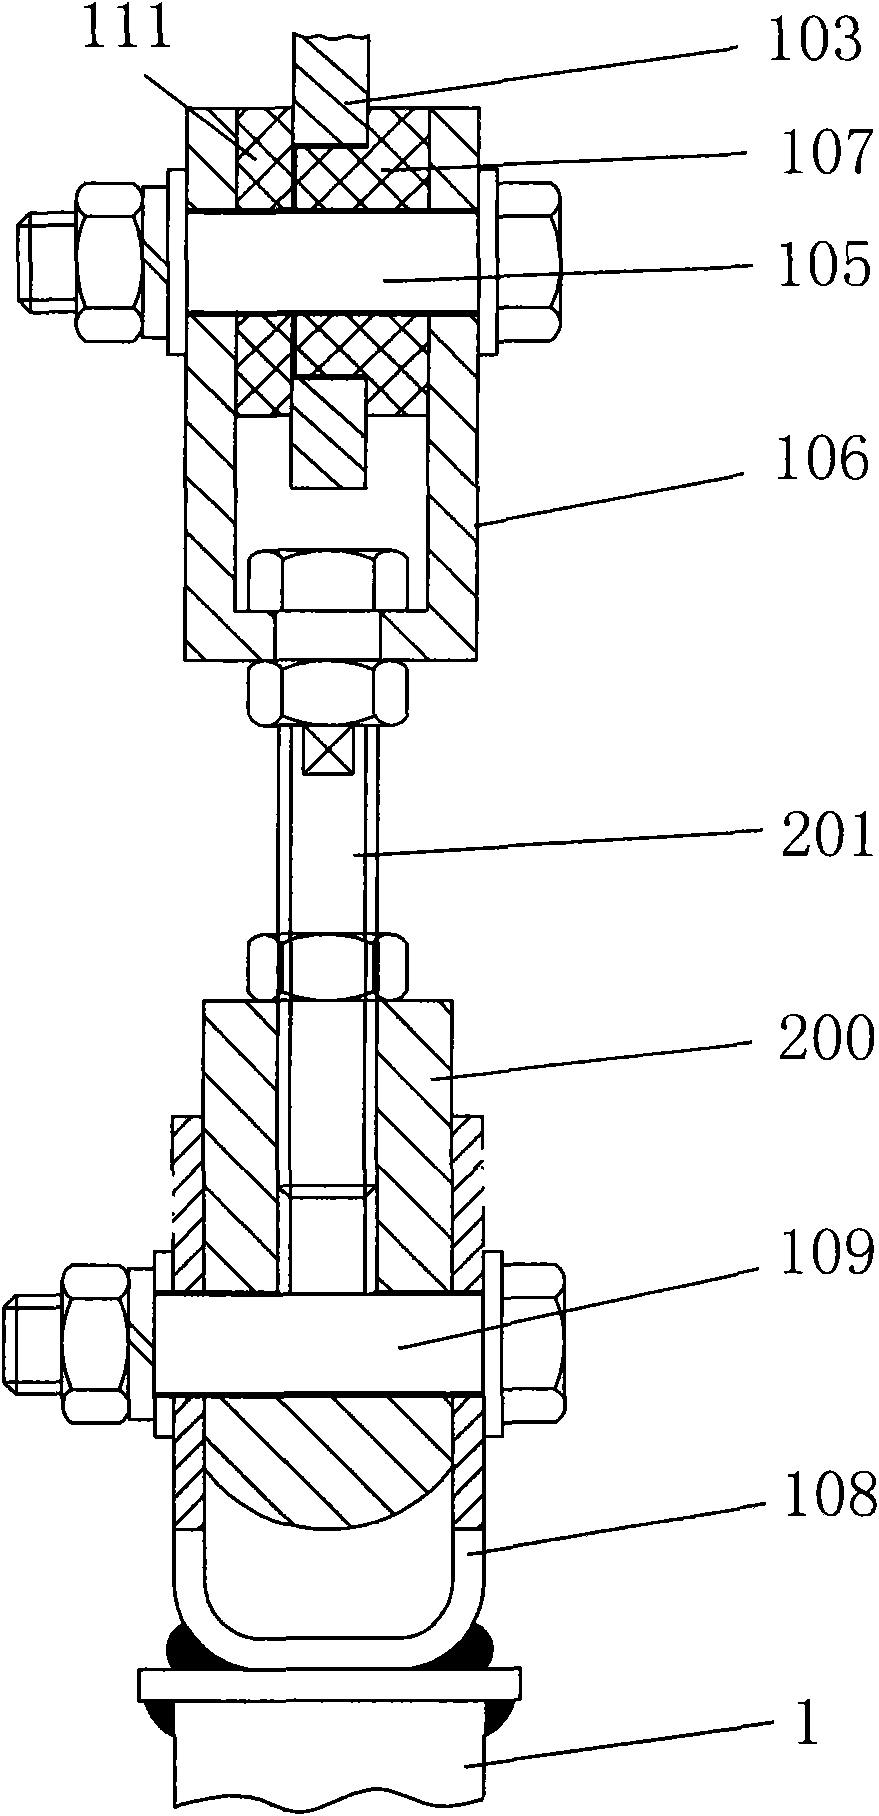 Insulating structure of subway shielding door system and civil engineering structure